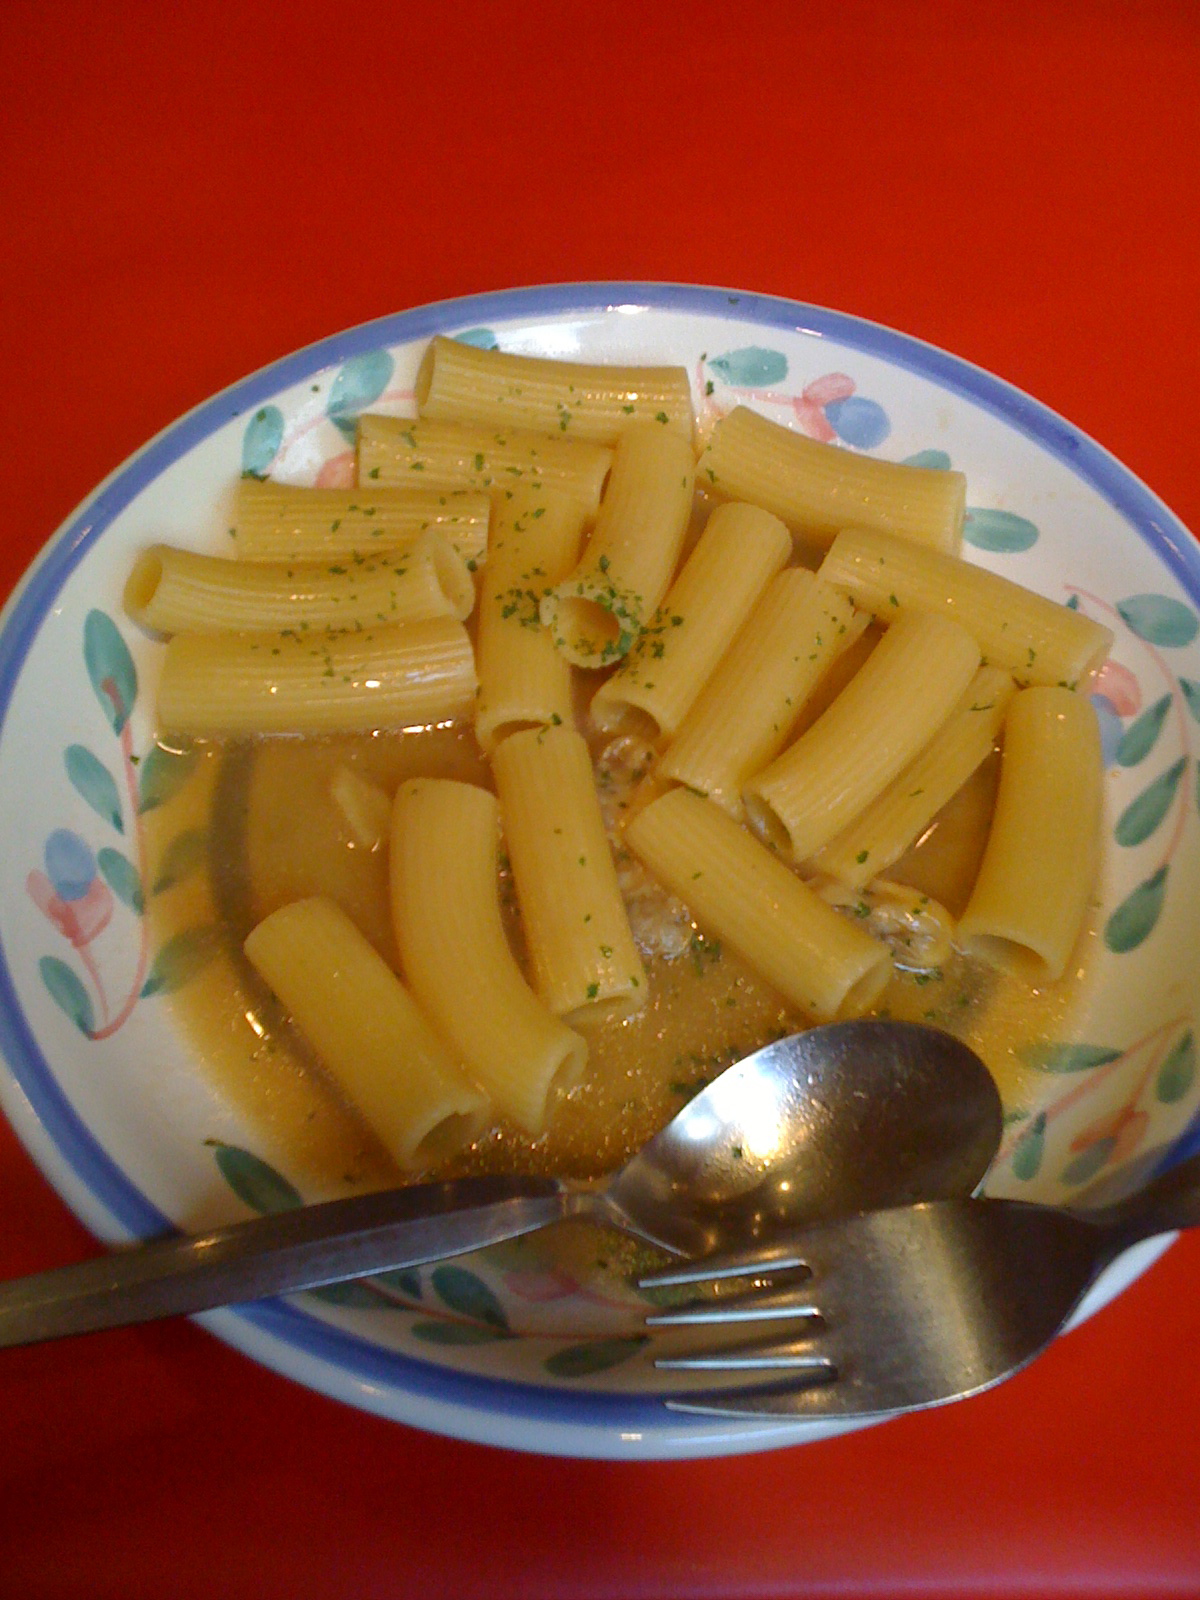 a dish full of macaroni and cheese on a table with spoons